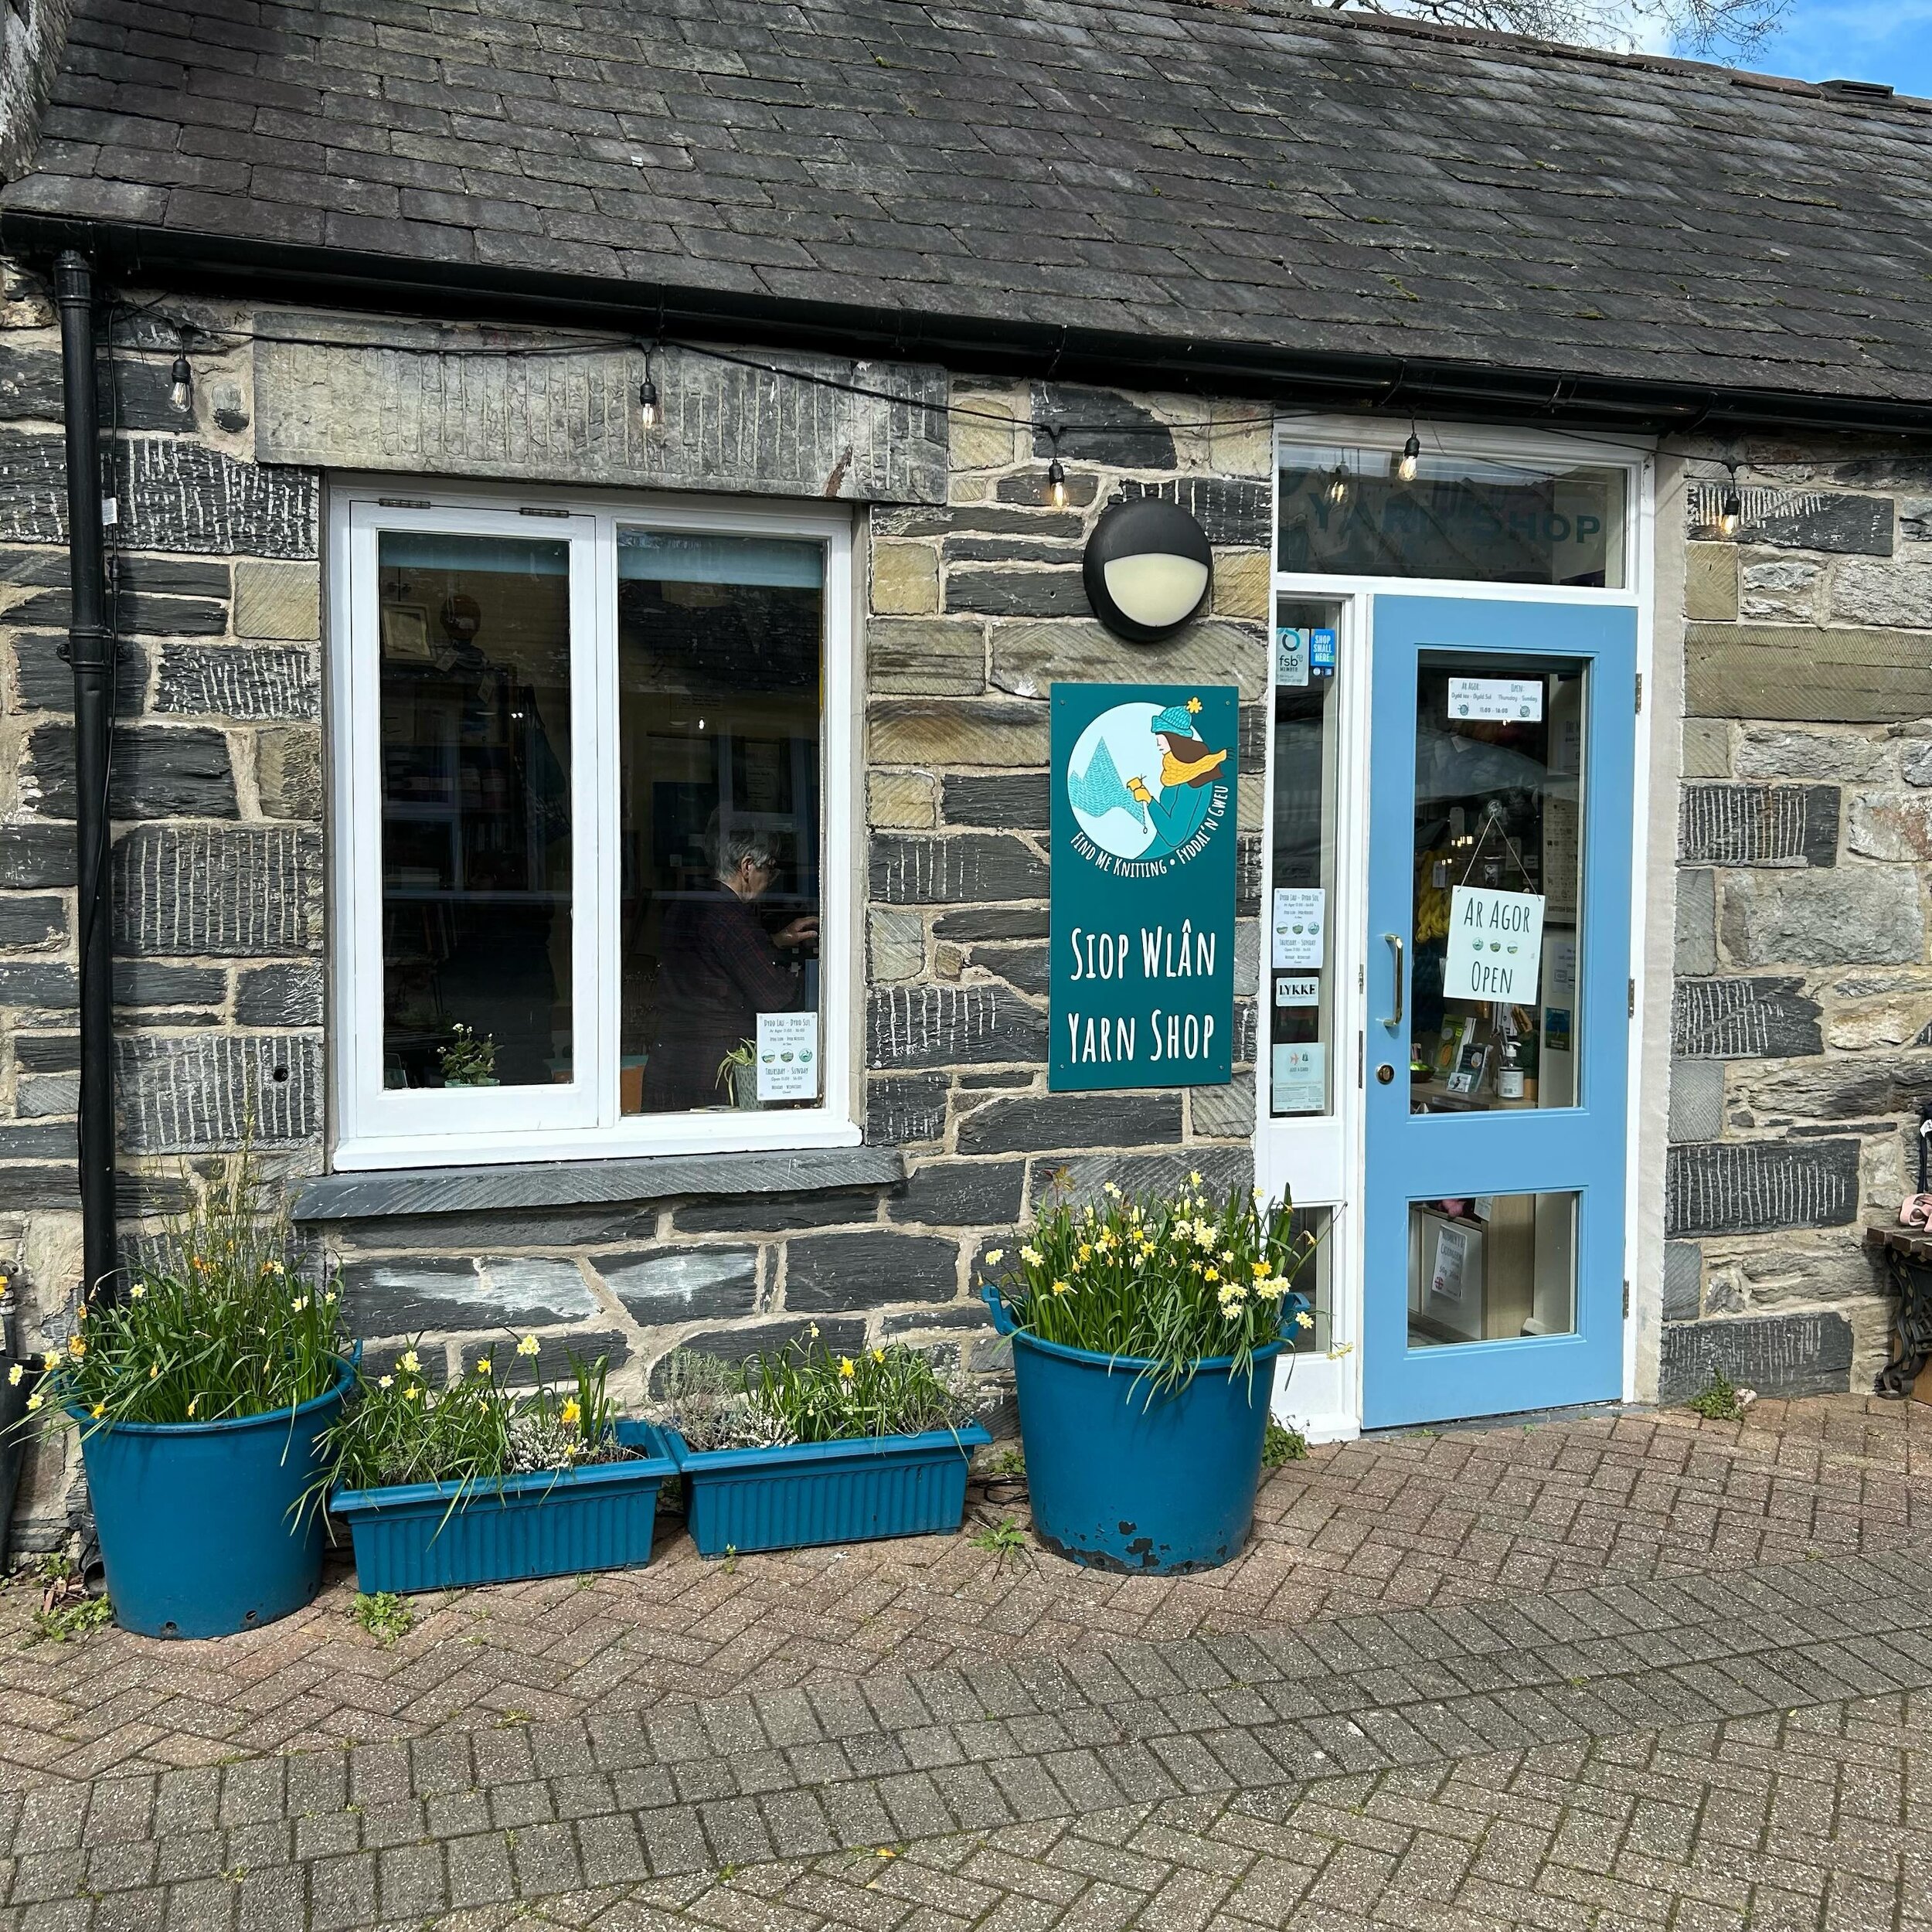 We&rsquo;re now open every week Thursday to Sunday, 11am until at least 4pm.

It&rsquo;s a glorious day here in Betws, so pop in and see Lindsay for your fill of woolly goodness! There&rsquo;s also some delicious fare next door at @findme_cooking and